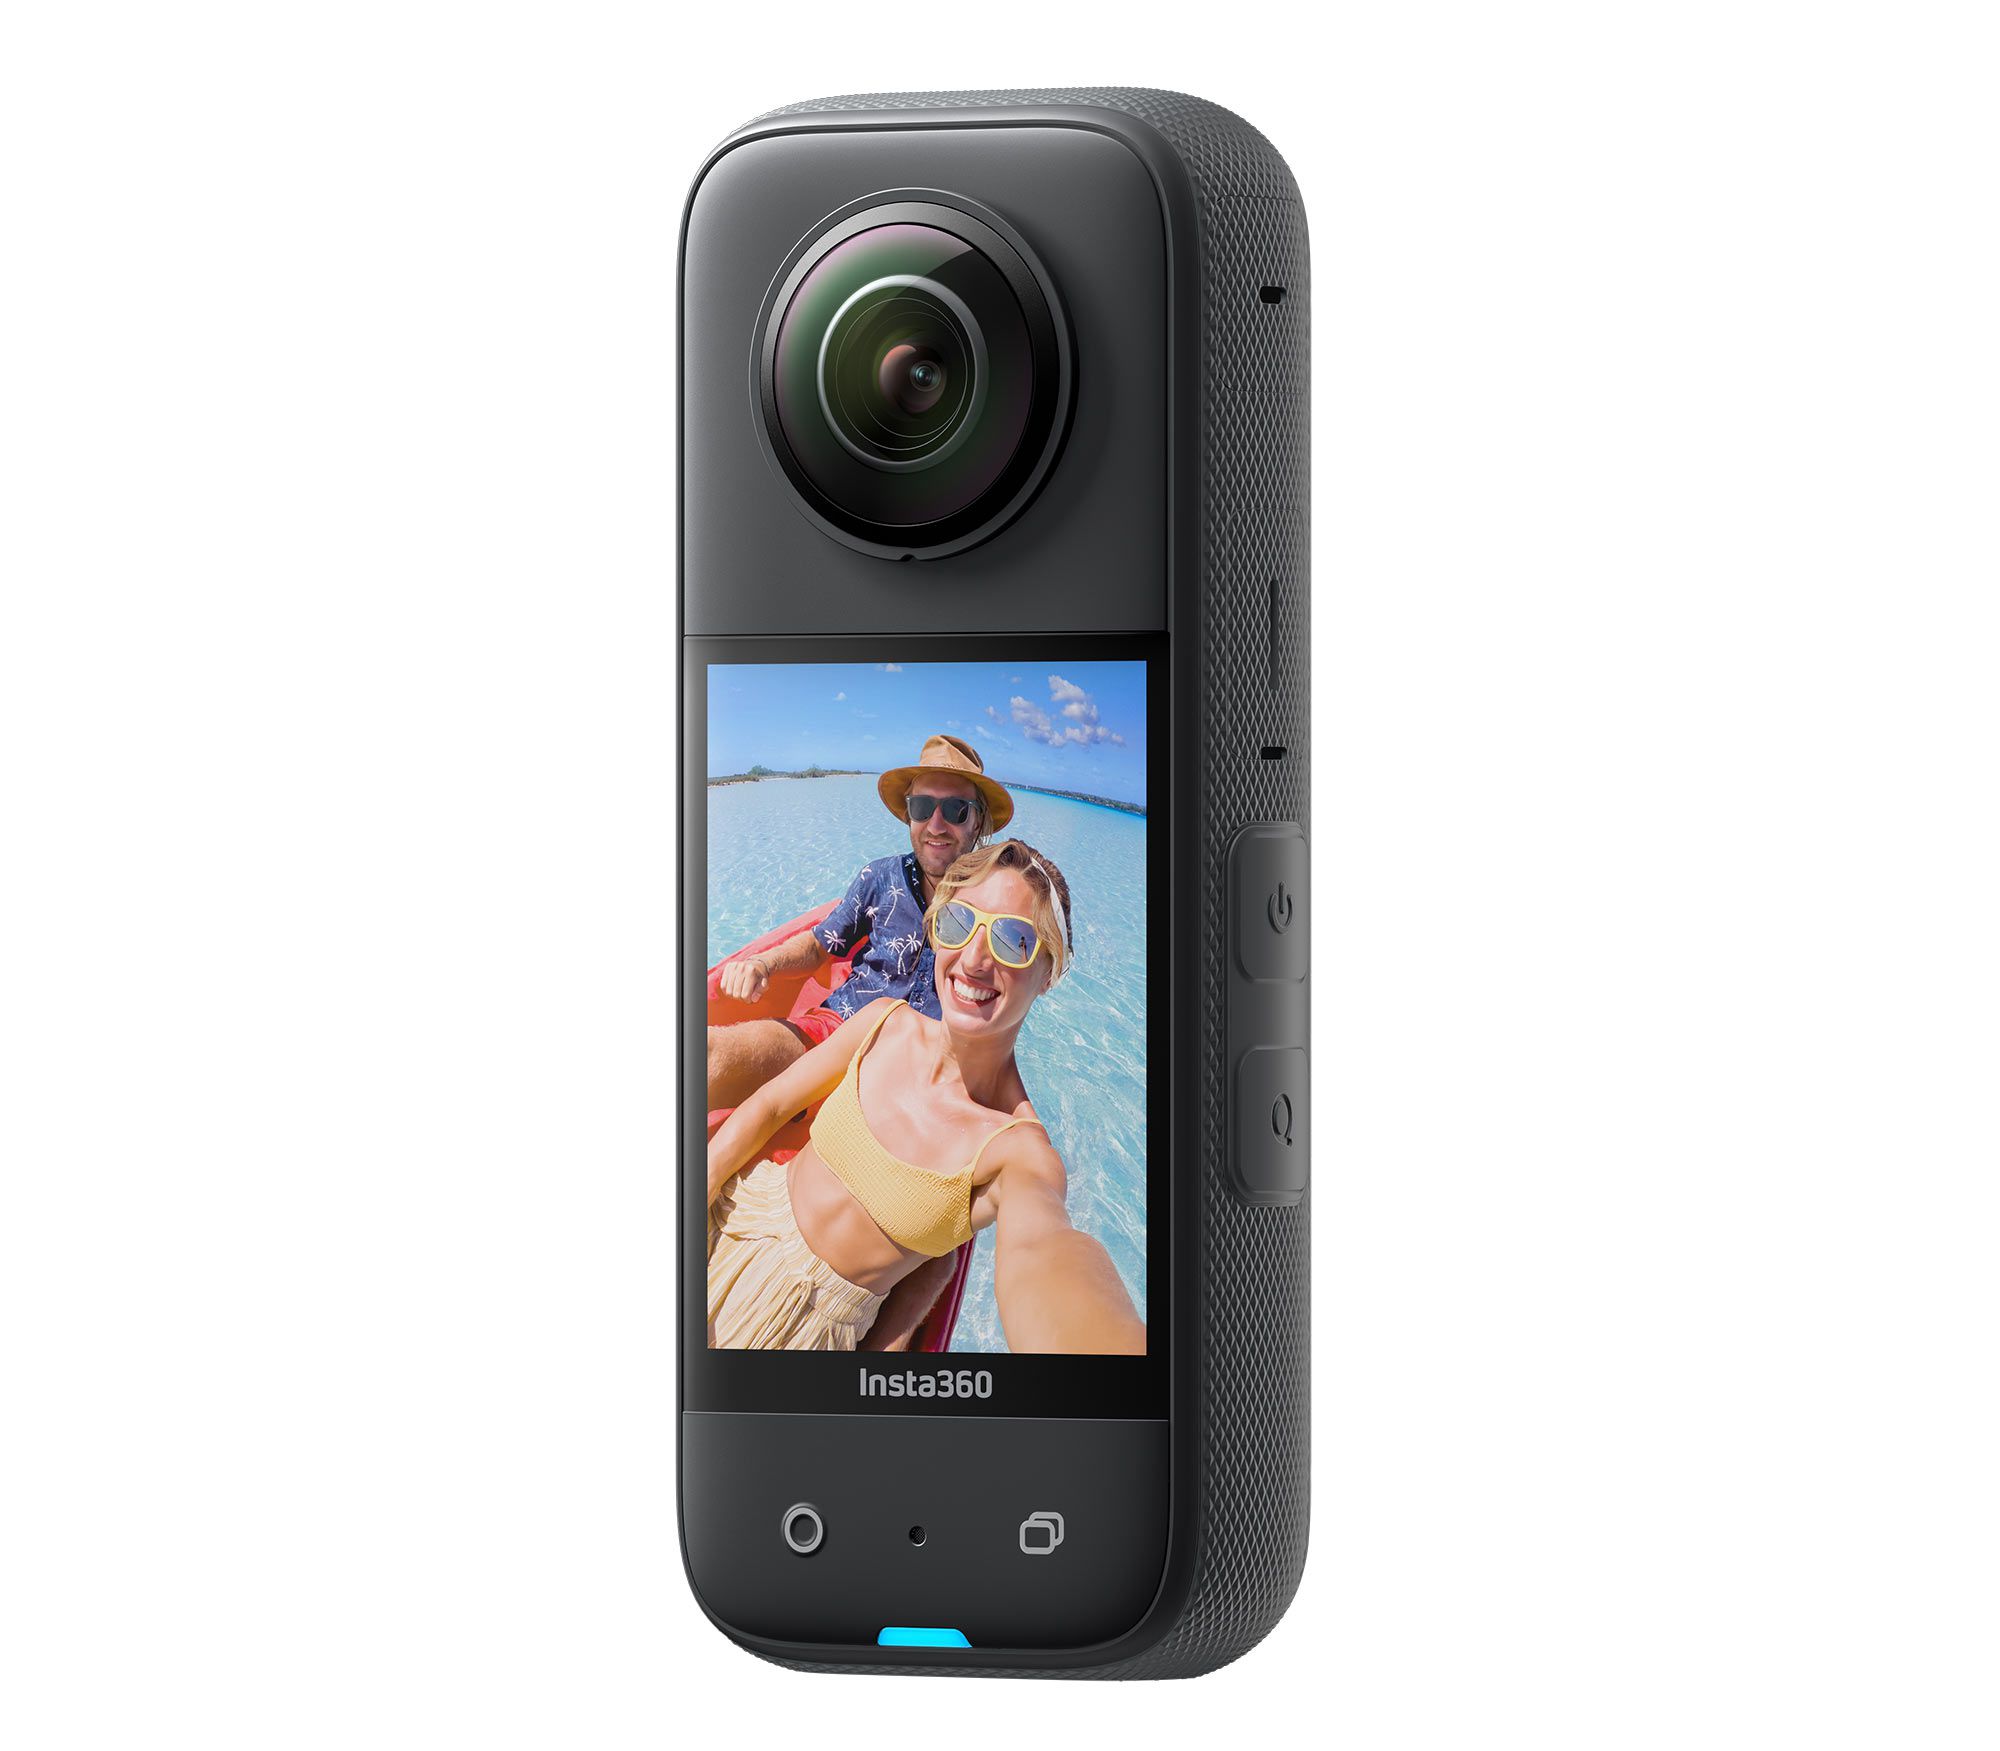 Shoot high-quality videos and stills with the new X3.